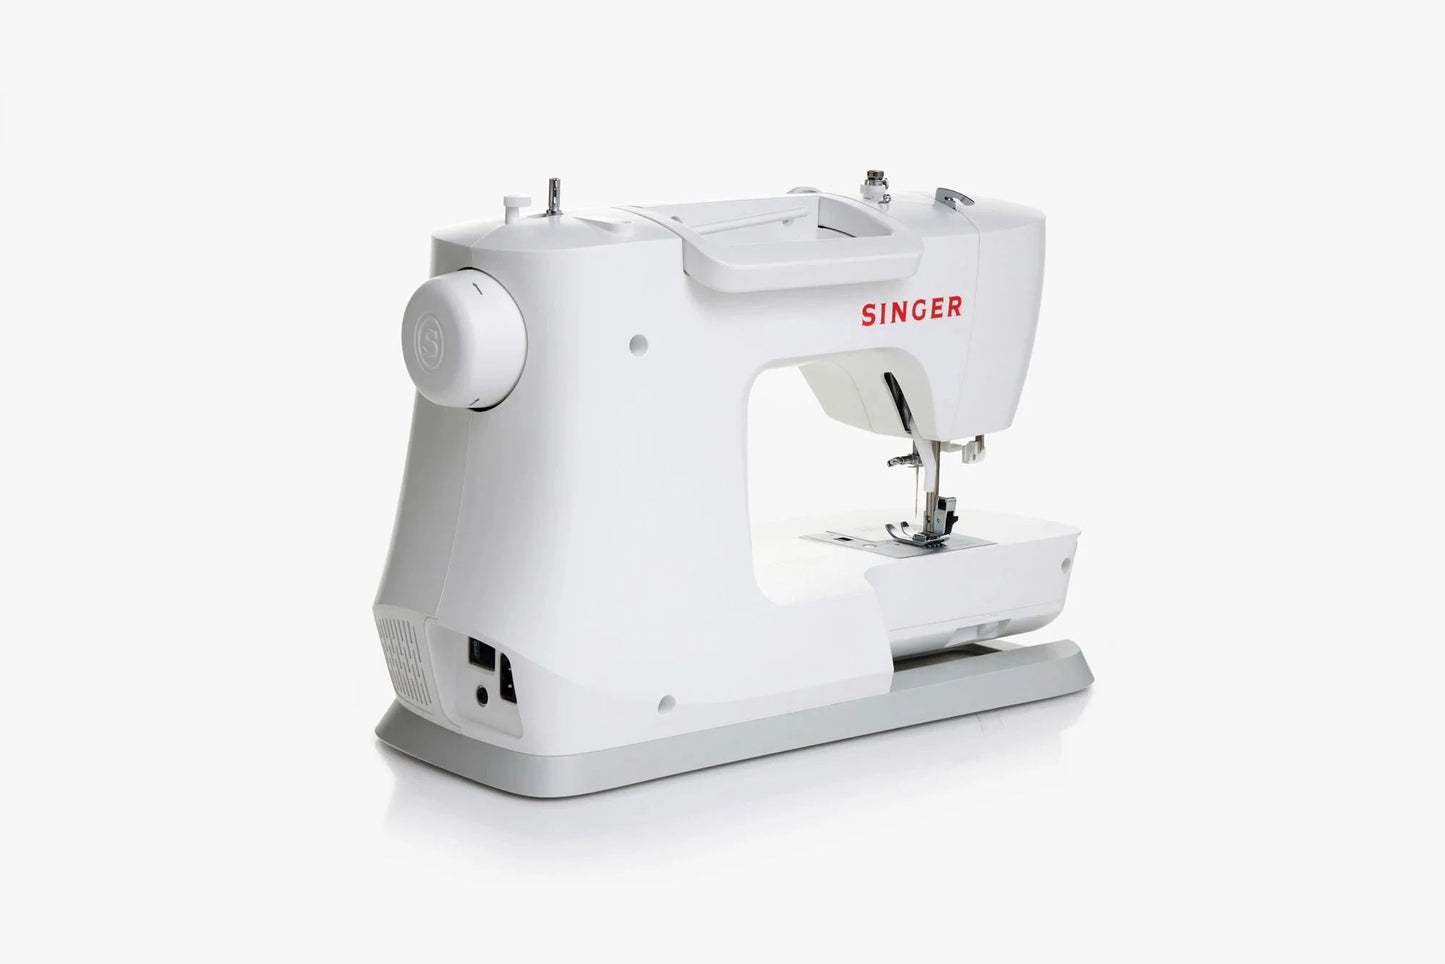 Singer Patchwork Plus C5985Q Sewing Machine - 200 stitch patterns with letters and numbers - Ex Display